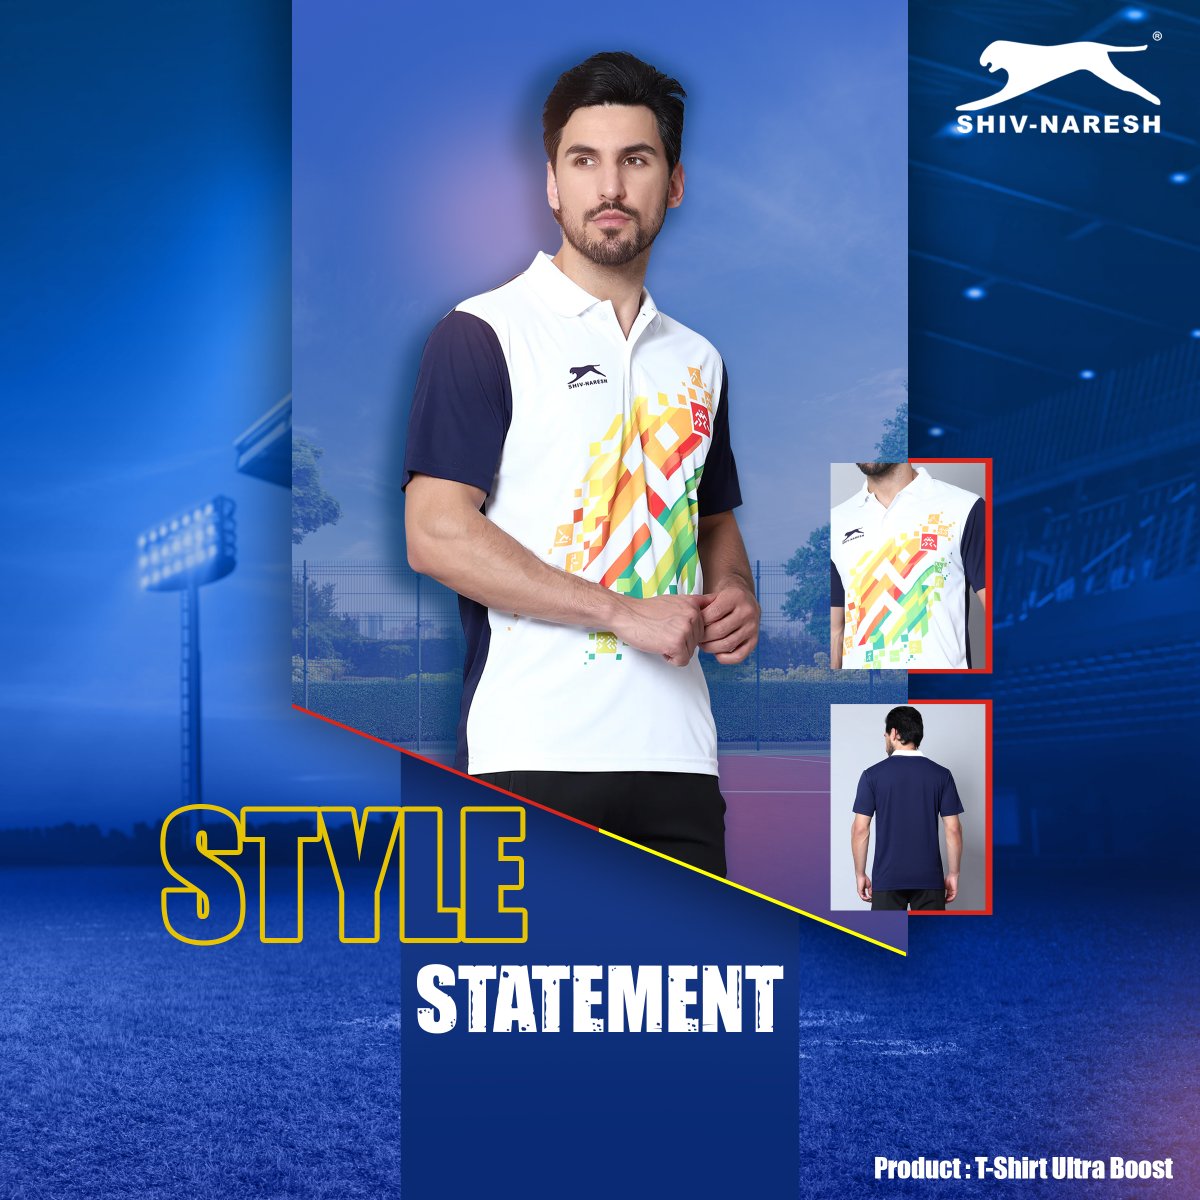 Stay stylish while you play with our sporty outfits! Look cool and feel great as you show off your moves. Let's have fun in style!
Tap on the link bit.ly/3Uy7eh8 to shop.

#ShivNaresh #BharatKaBrand #DeshKiVardi #activewear #casualwear #sportswear #TeamIndia